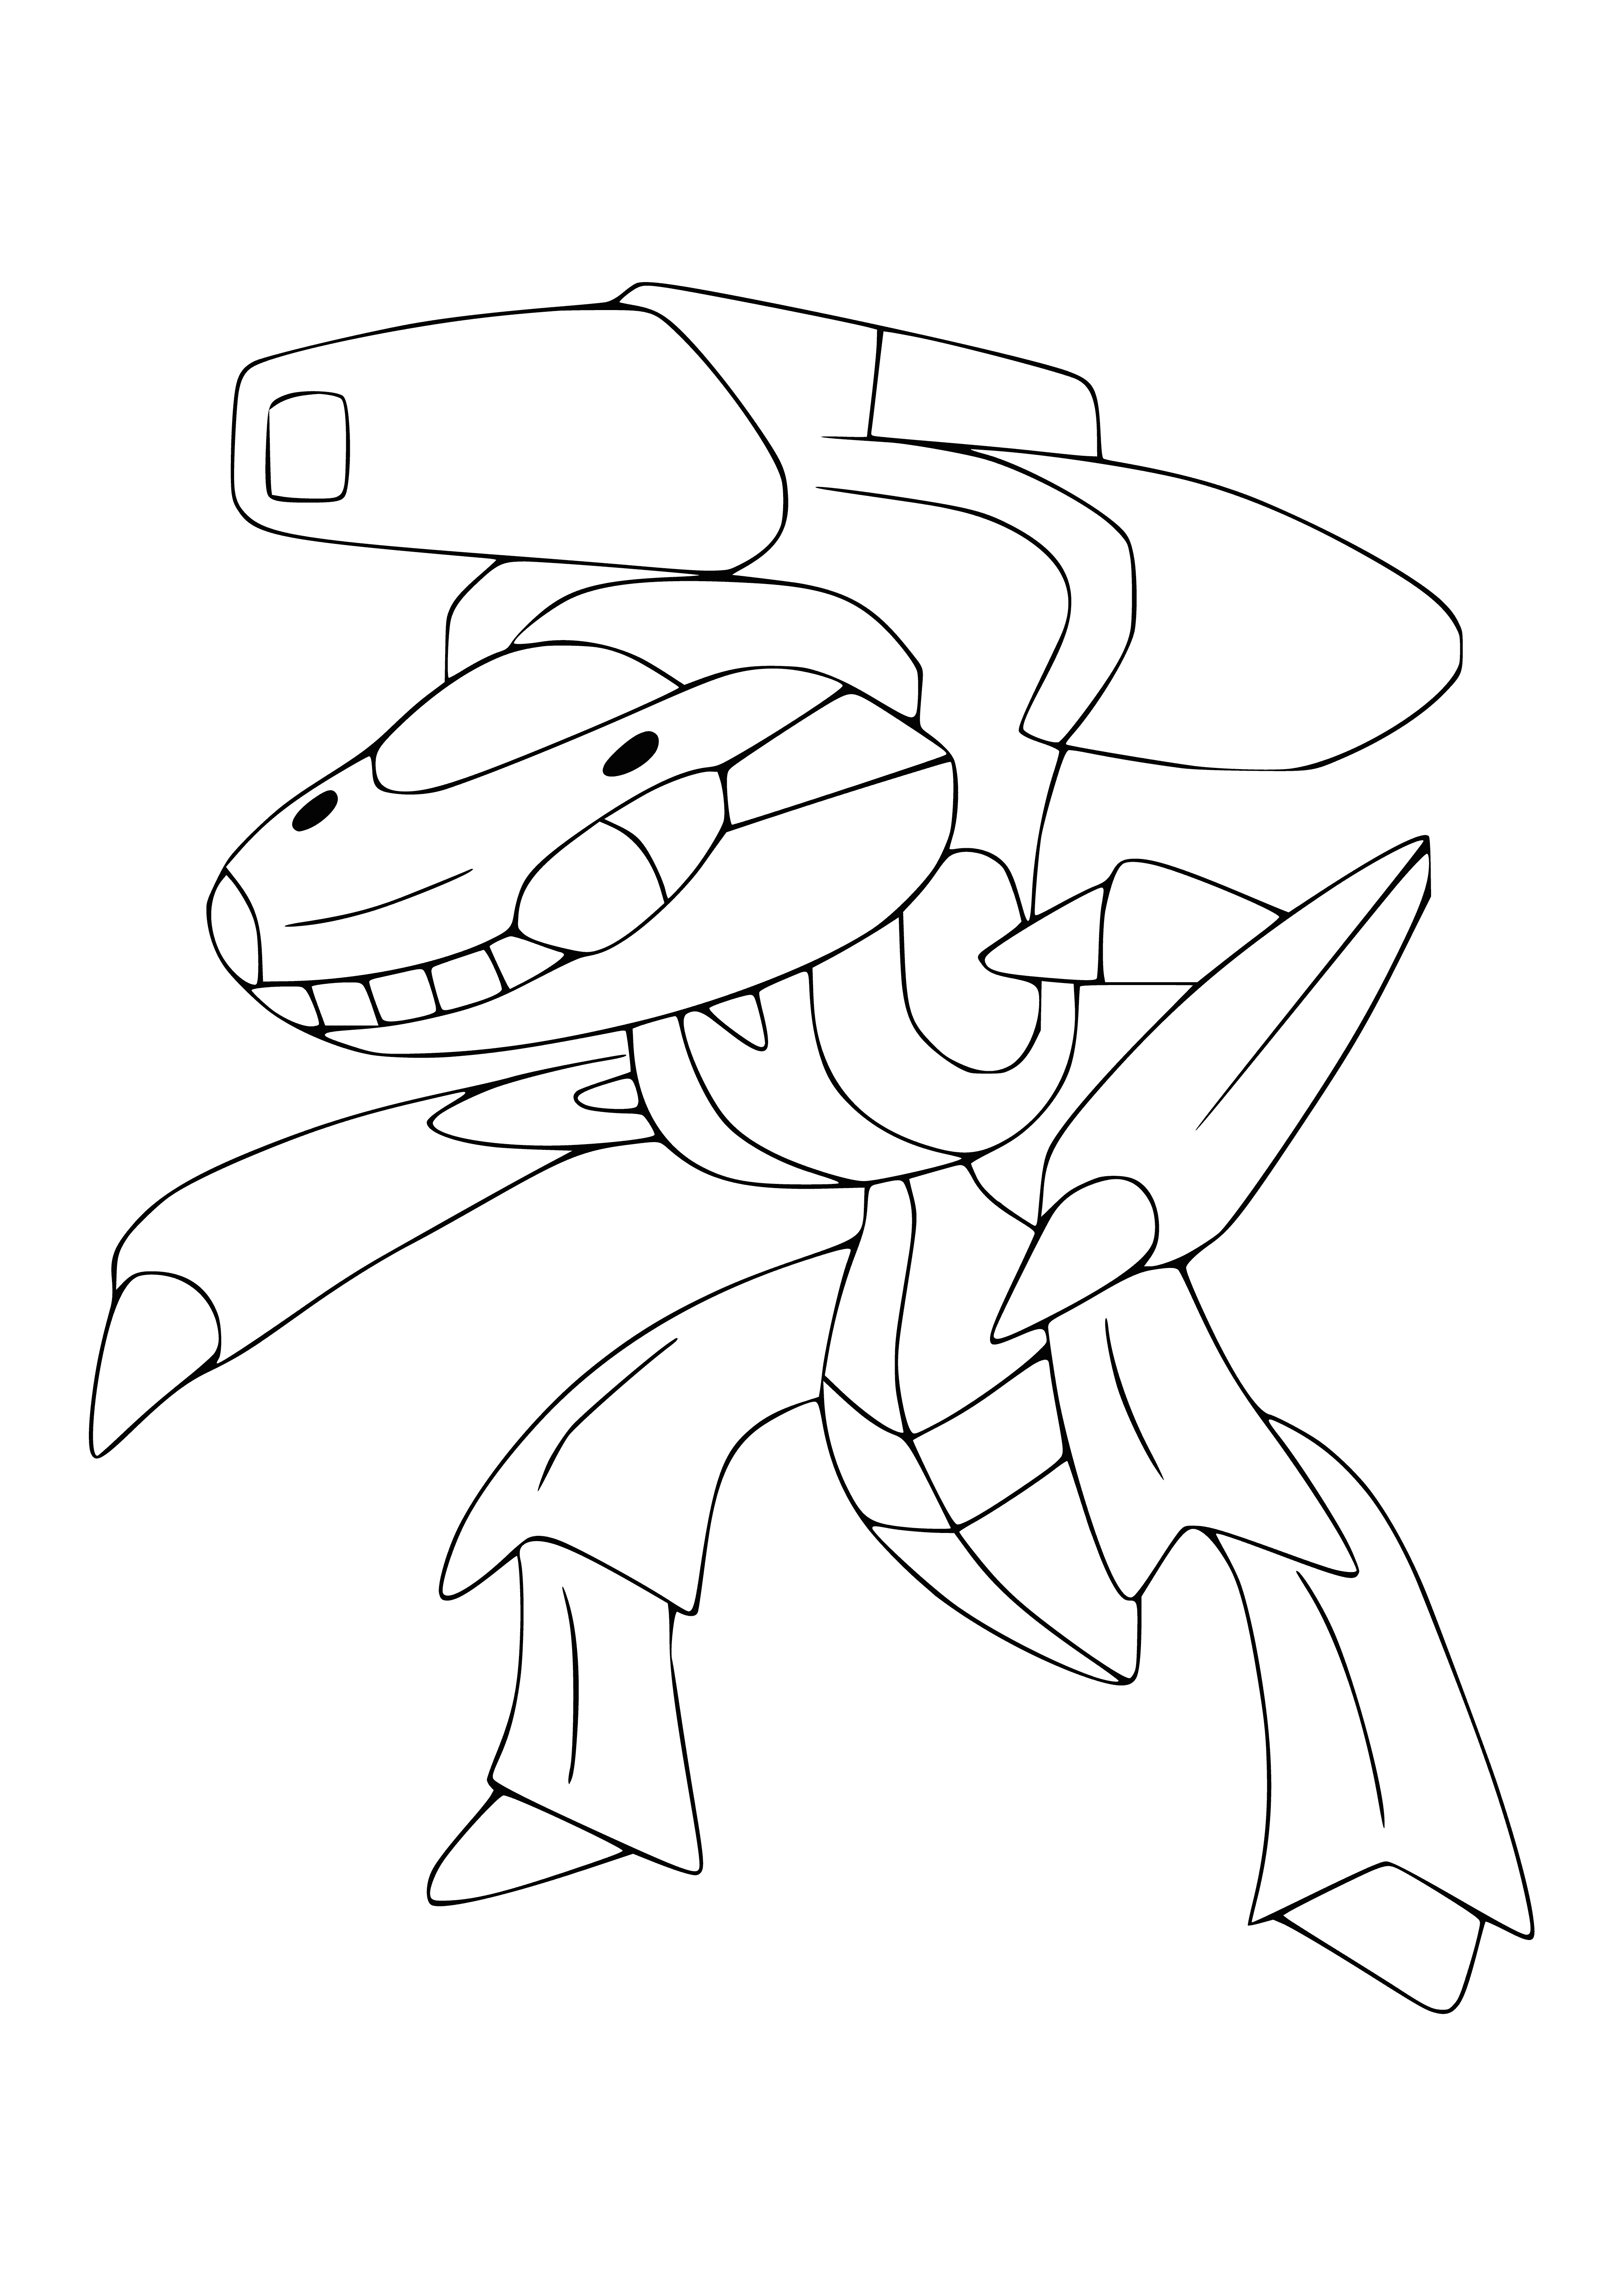 Legendary Pokemon Genesect coloring page